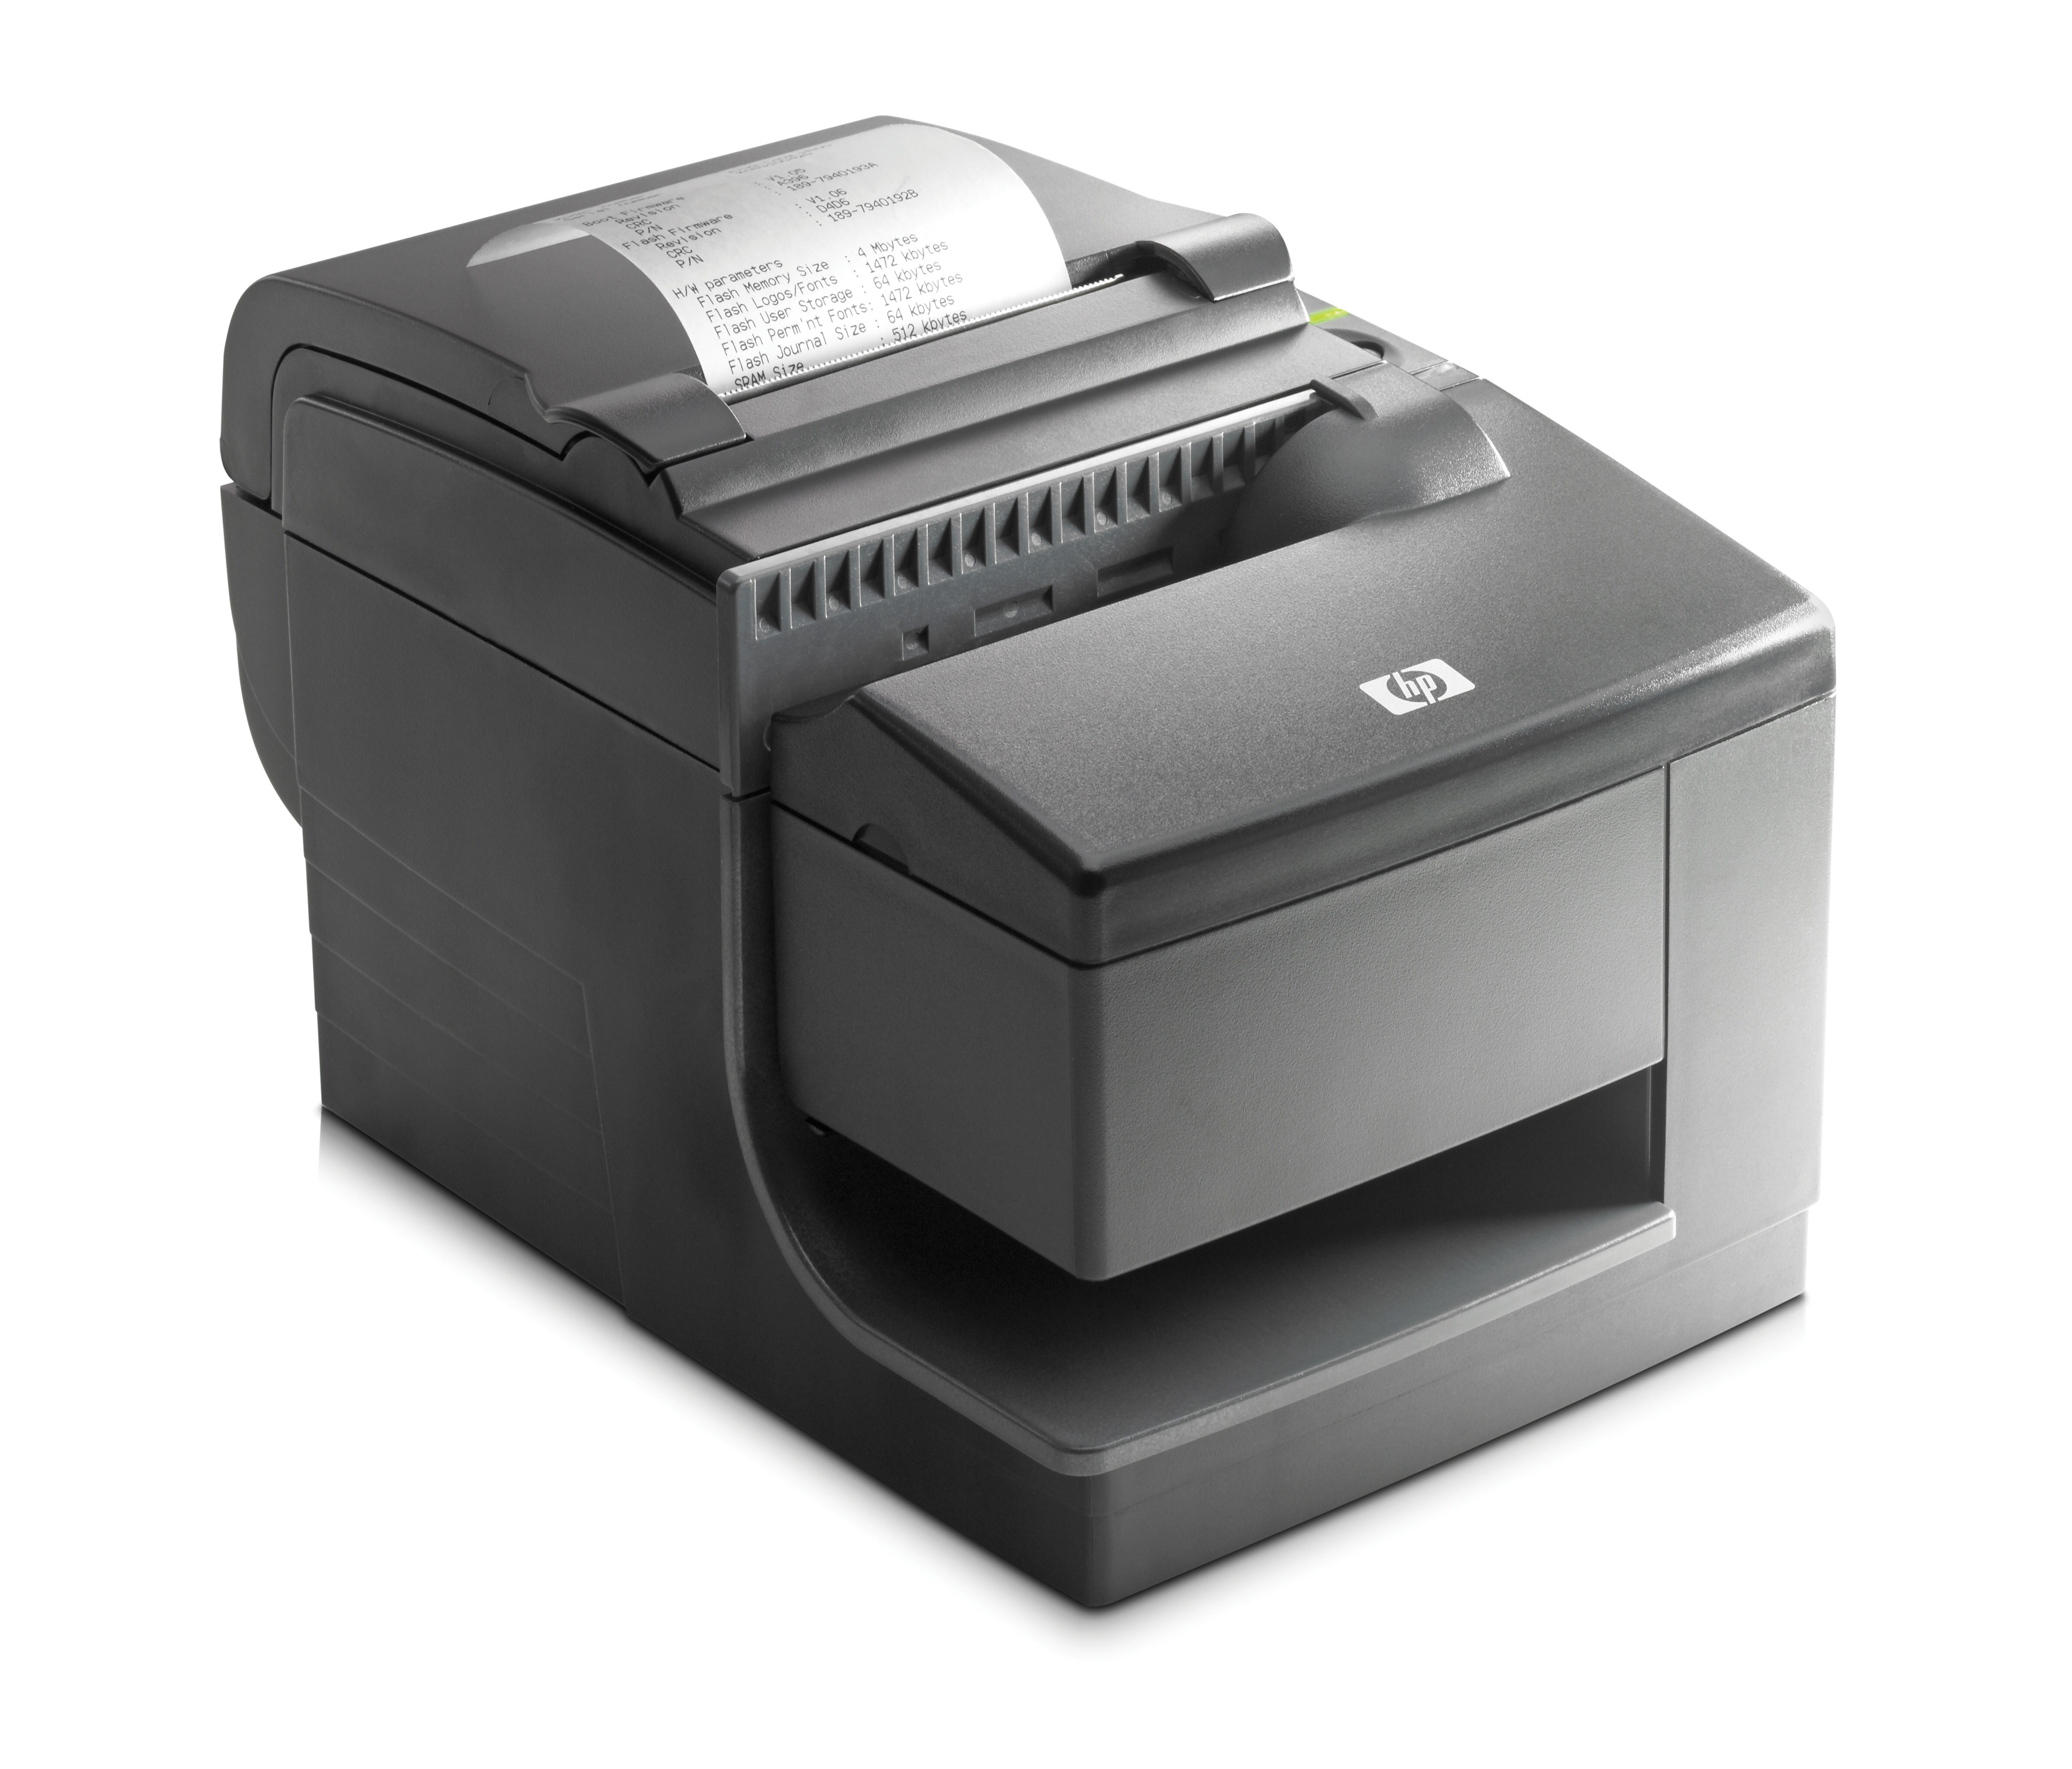 HP Hybrid Thermal Printer with MICR - Receipt printer - two-color (monochrome) - direct thermal - Roll (0.32 in) - 203 dpi - up to 59.2 lines/sec - USB - cutter